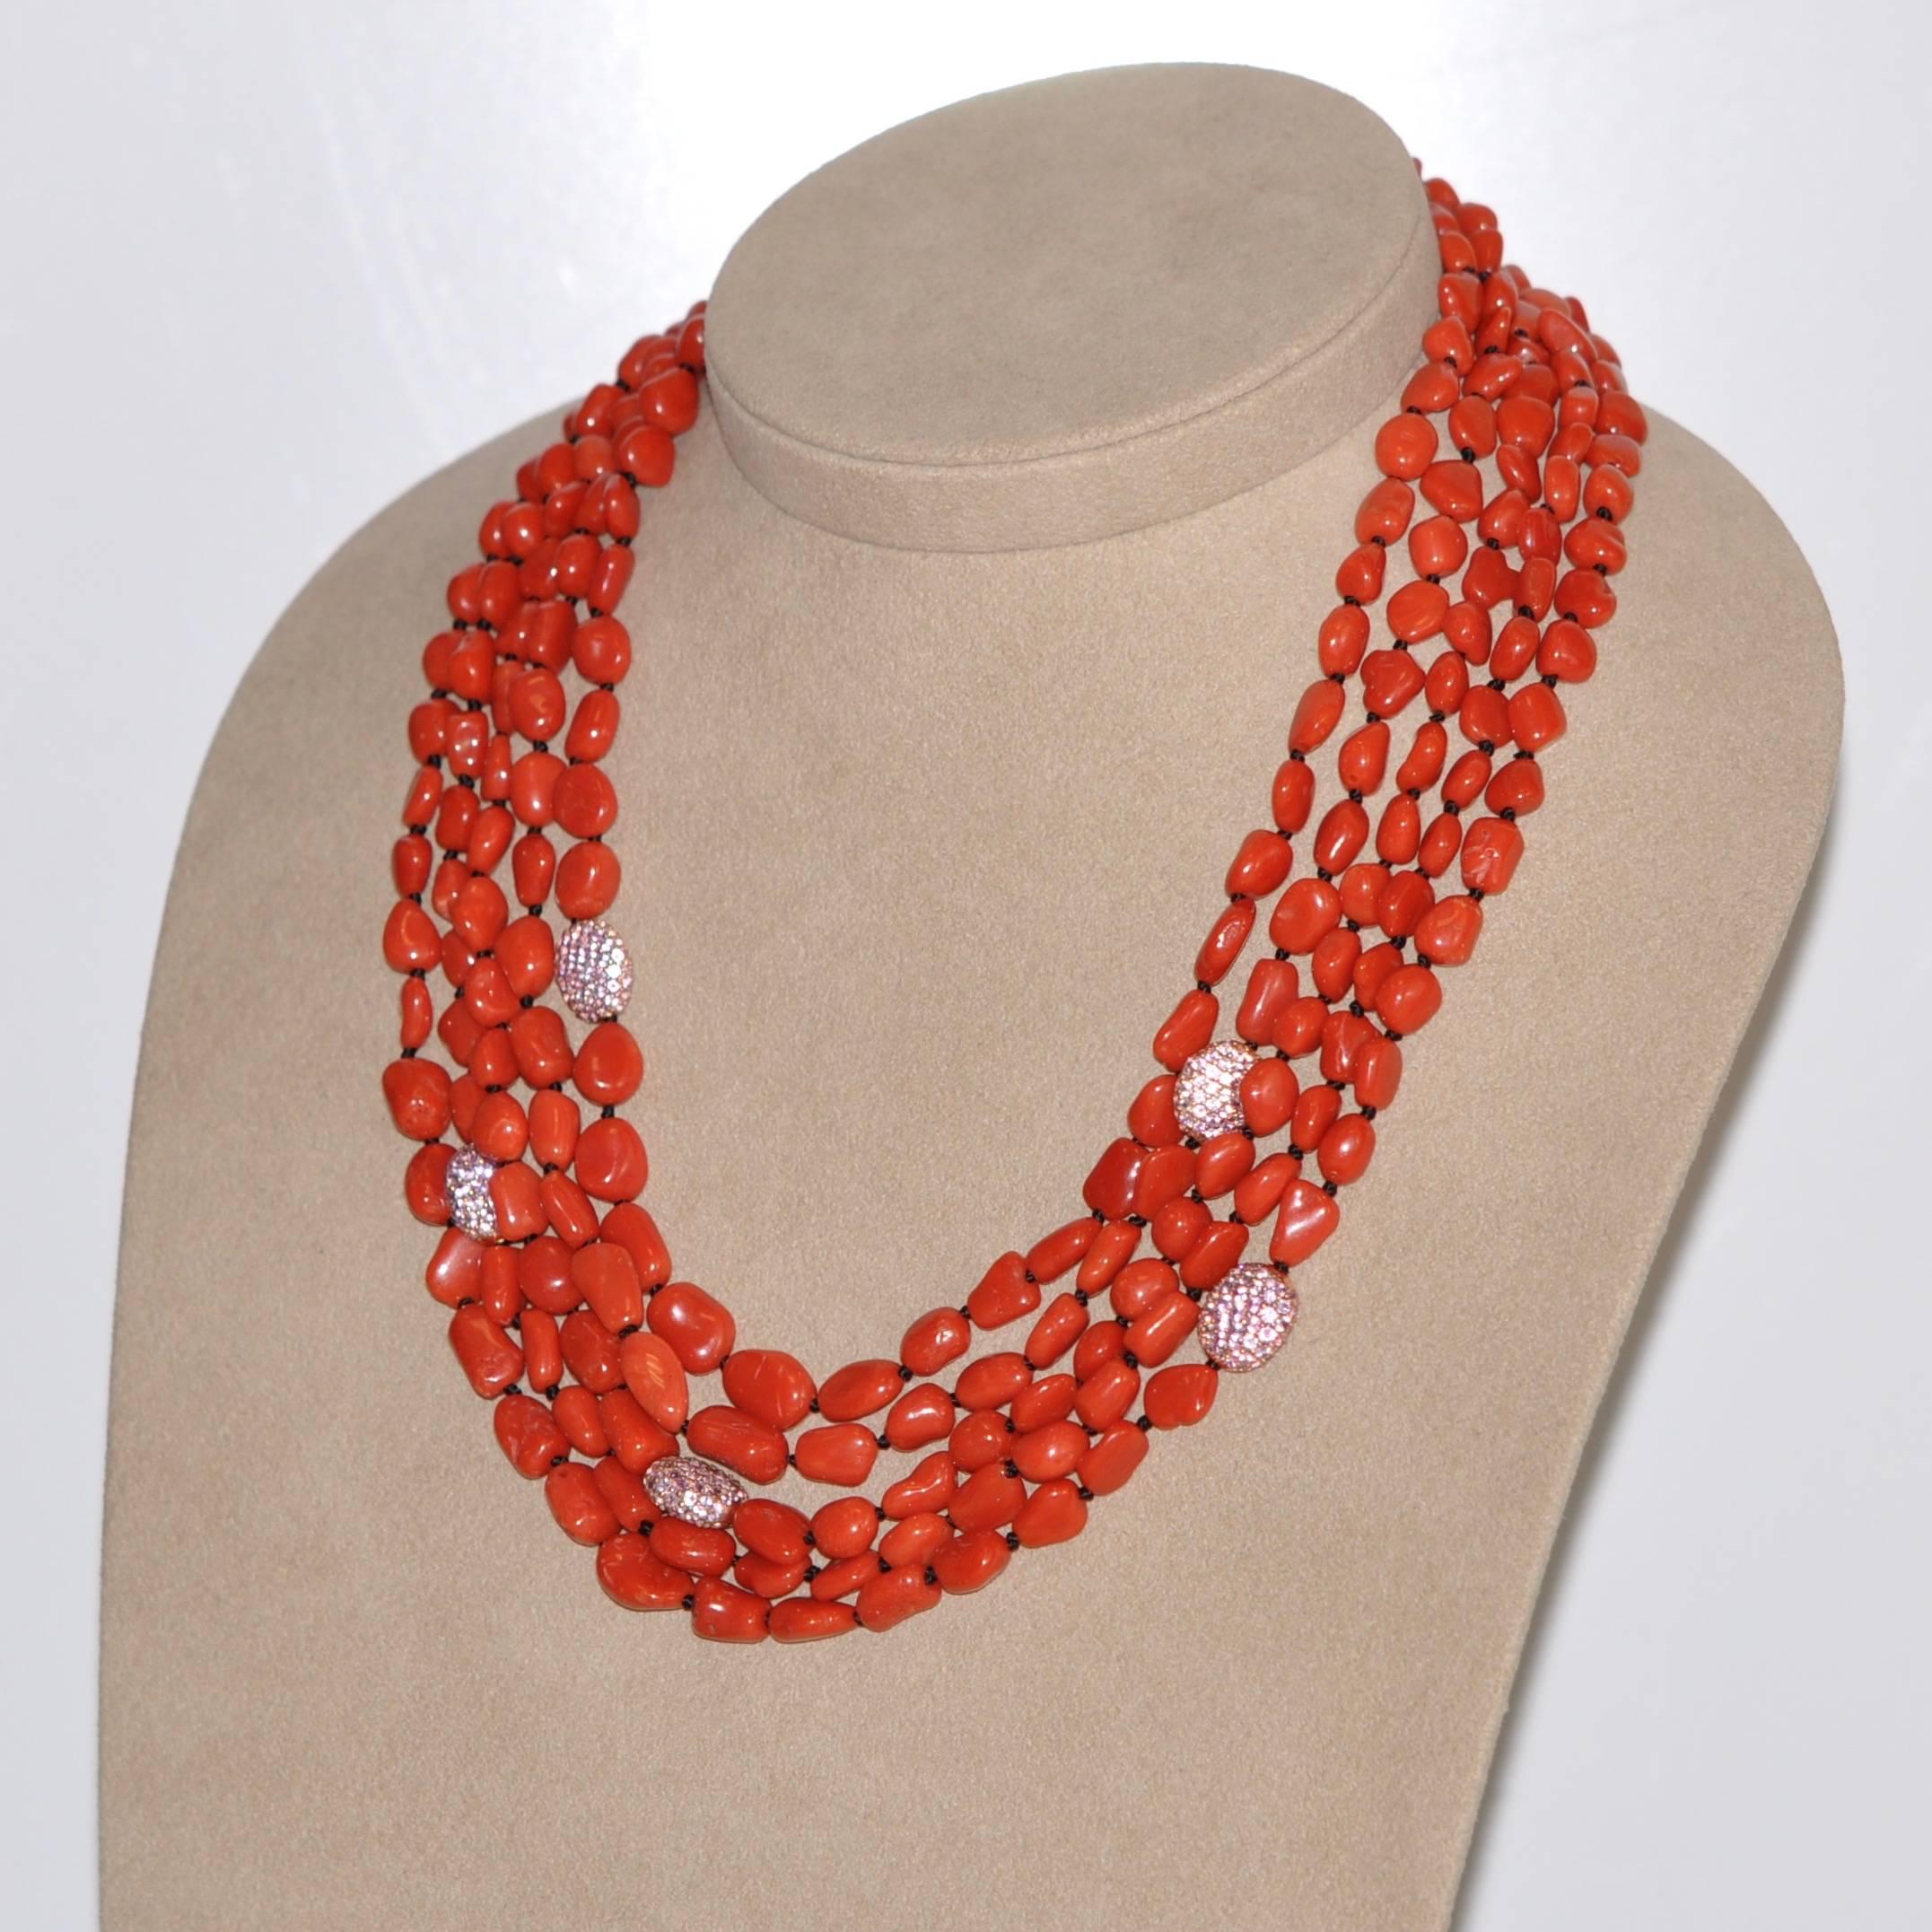 Welcome to the exquisite world of unique, luxurious jewelry. Let us introduce you to our multi-strand necklace in coral, pink sapphire beads and bakelite clasp, an exceptional piece that marries the natural beauty of coral and pink sapphires with